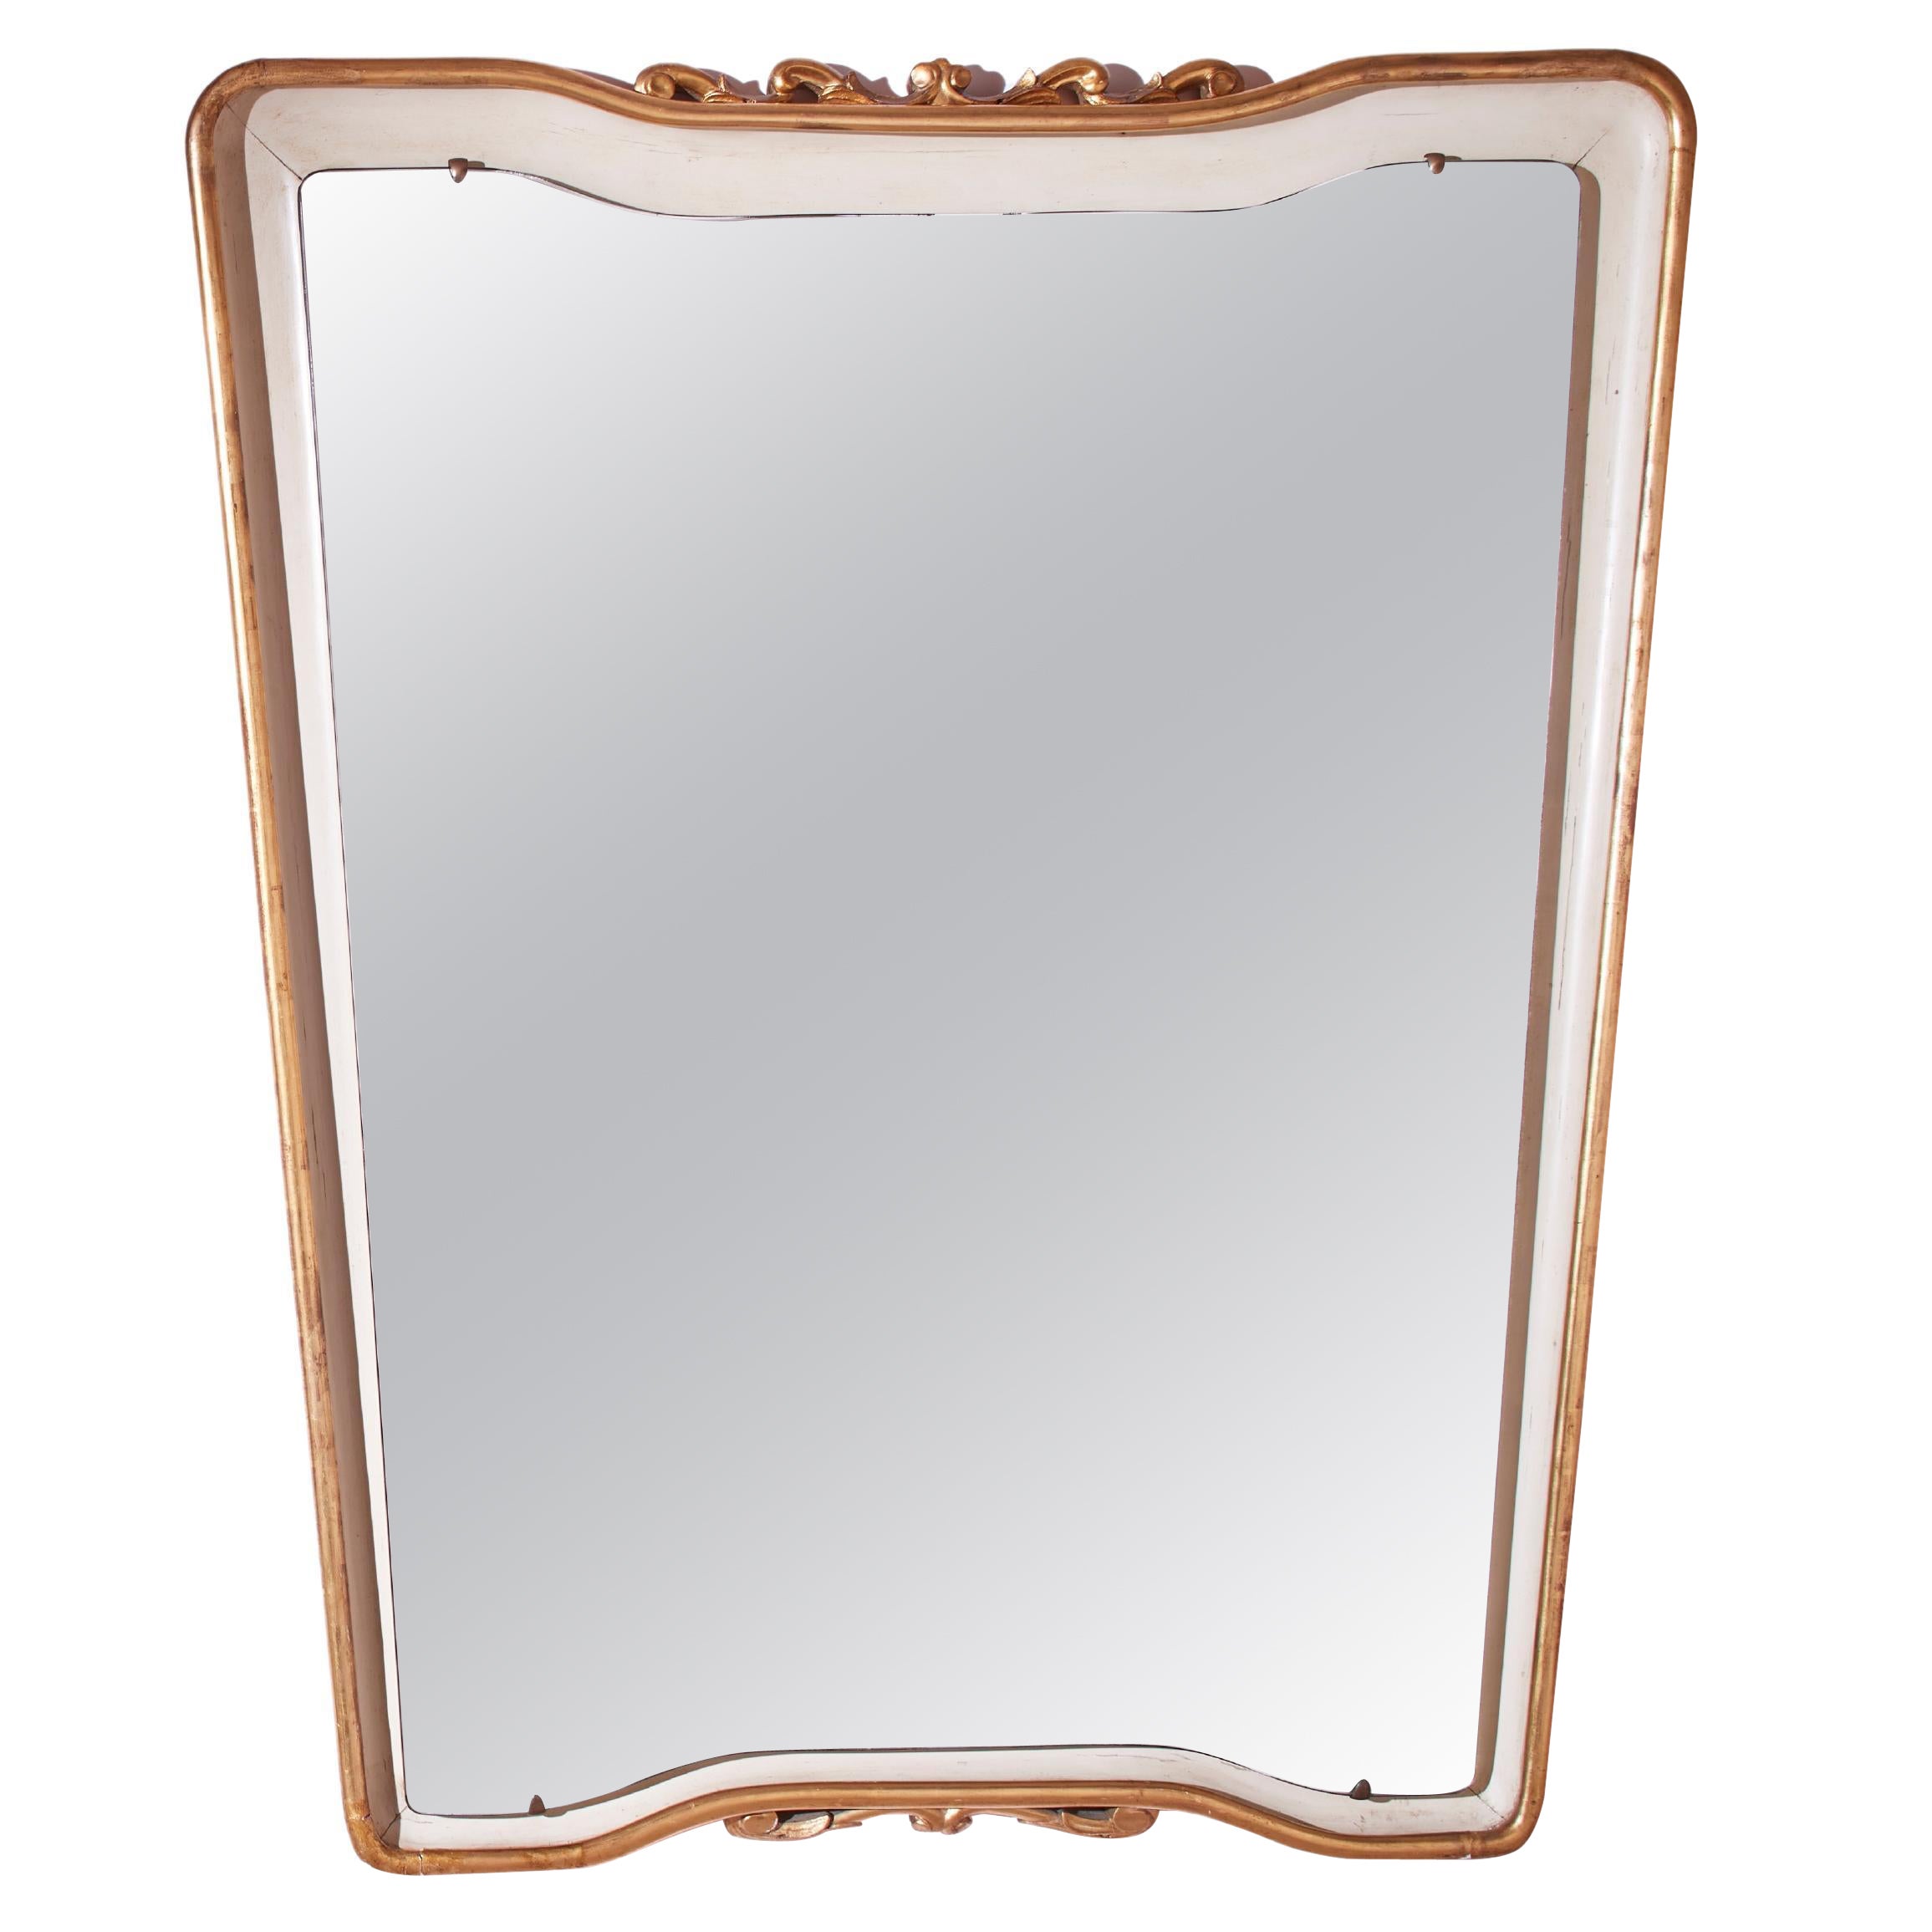 What is a trapezoid mirror?